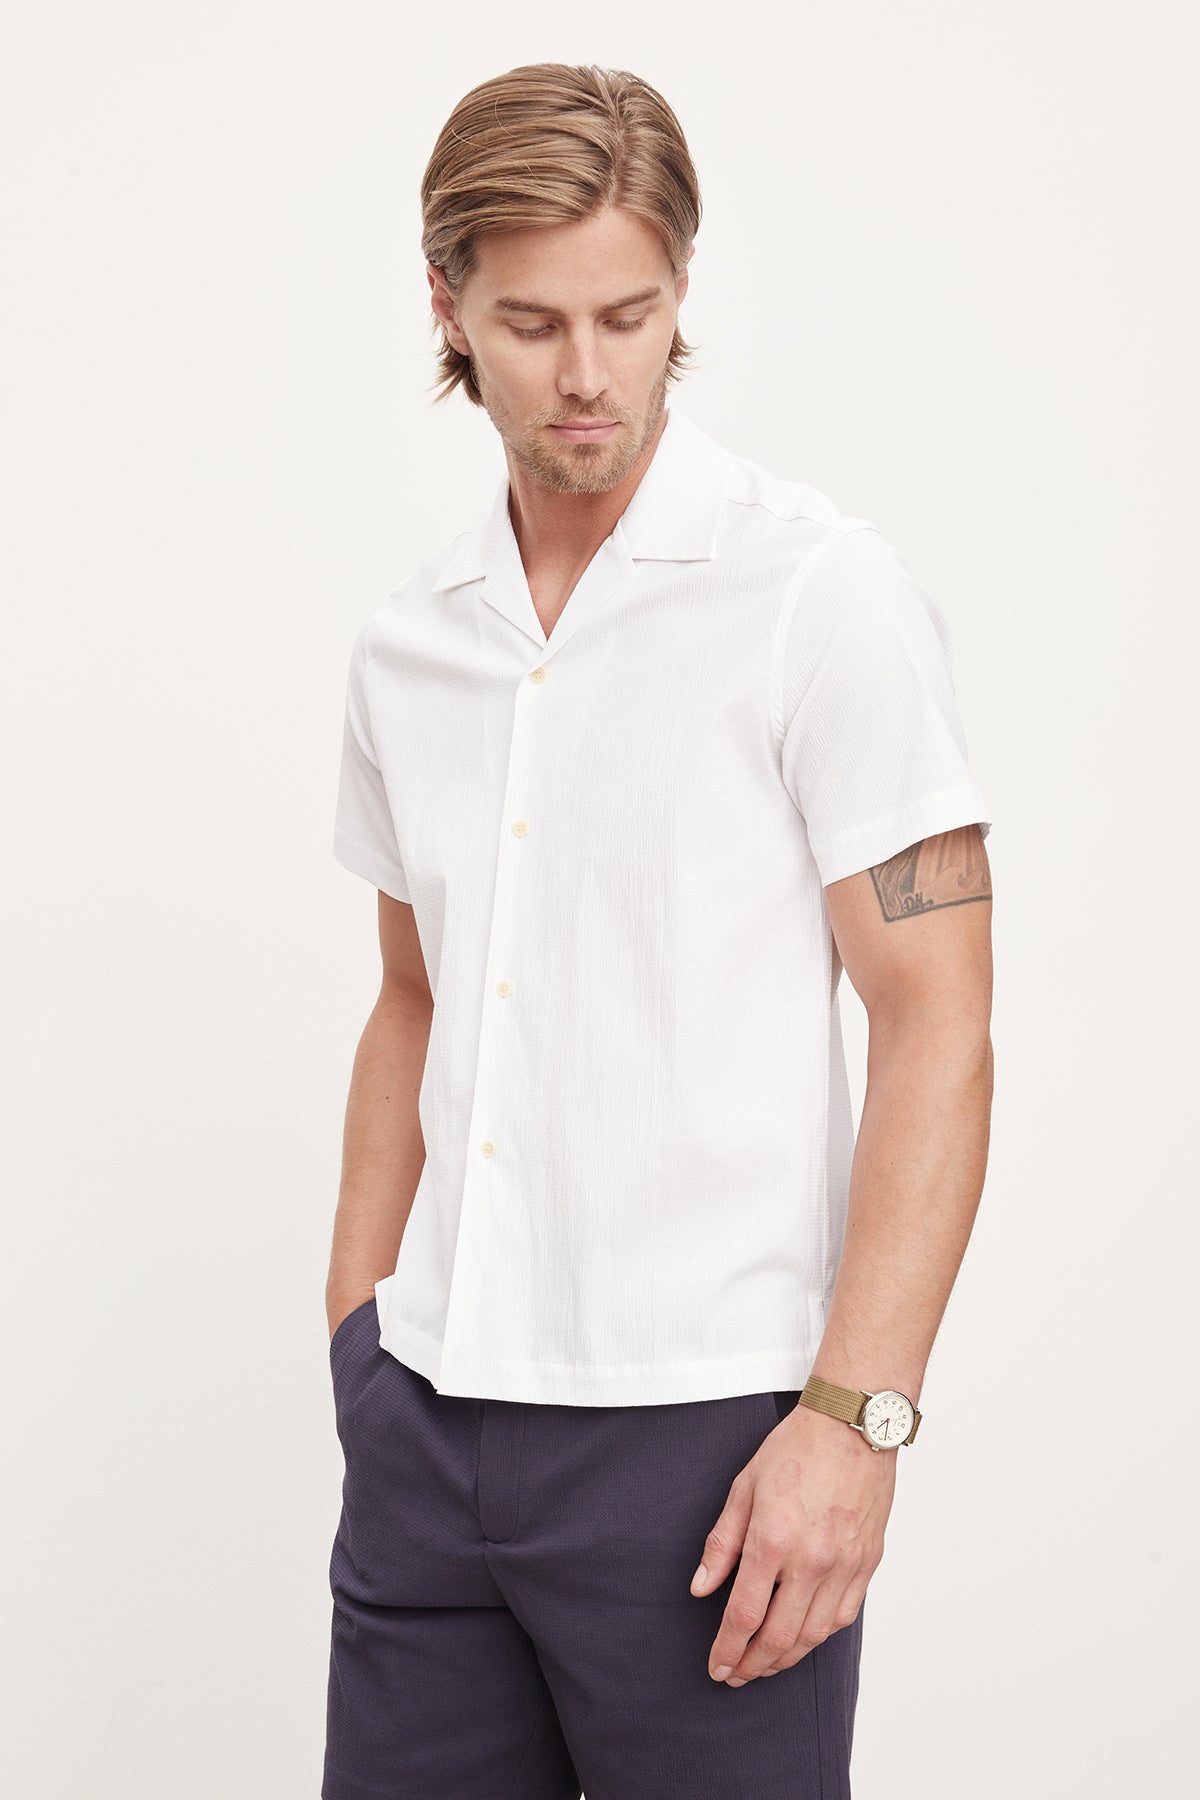 A man in a white short-sleeved Velvet by Graham & Spencer FRANK button-up shirt and dark pants, looking to the side with his hands in his pockets.-36918598336705